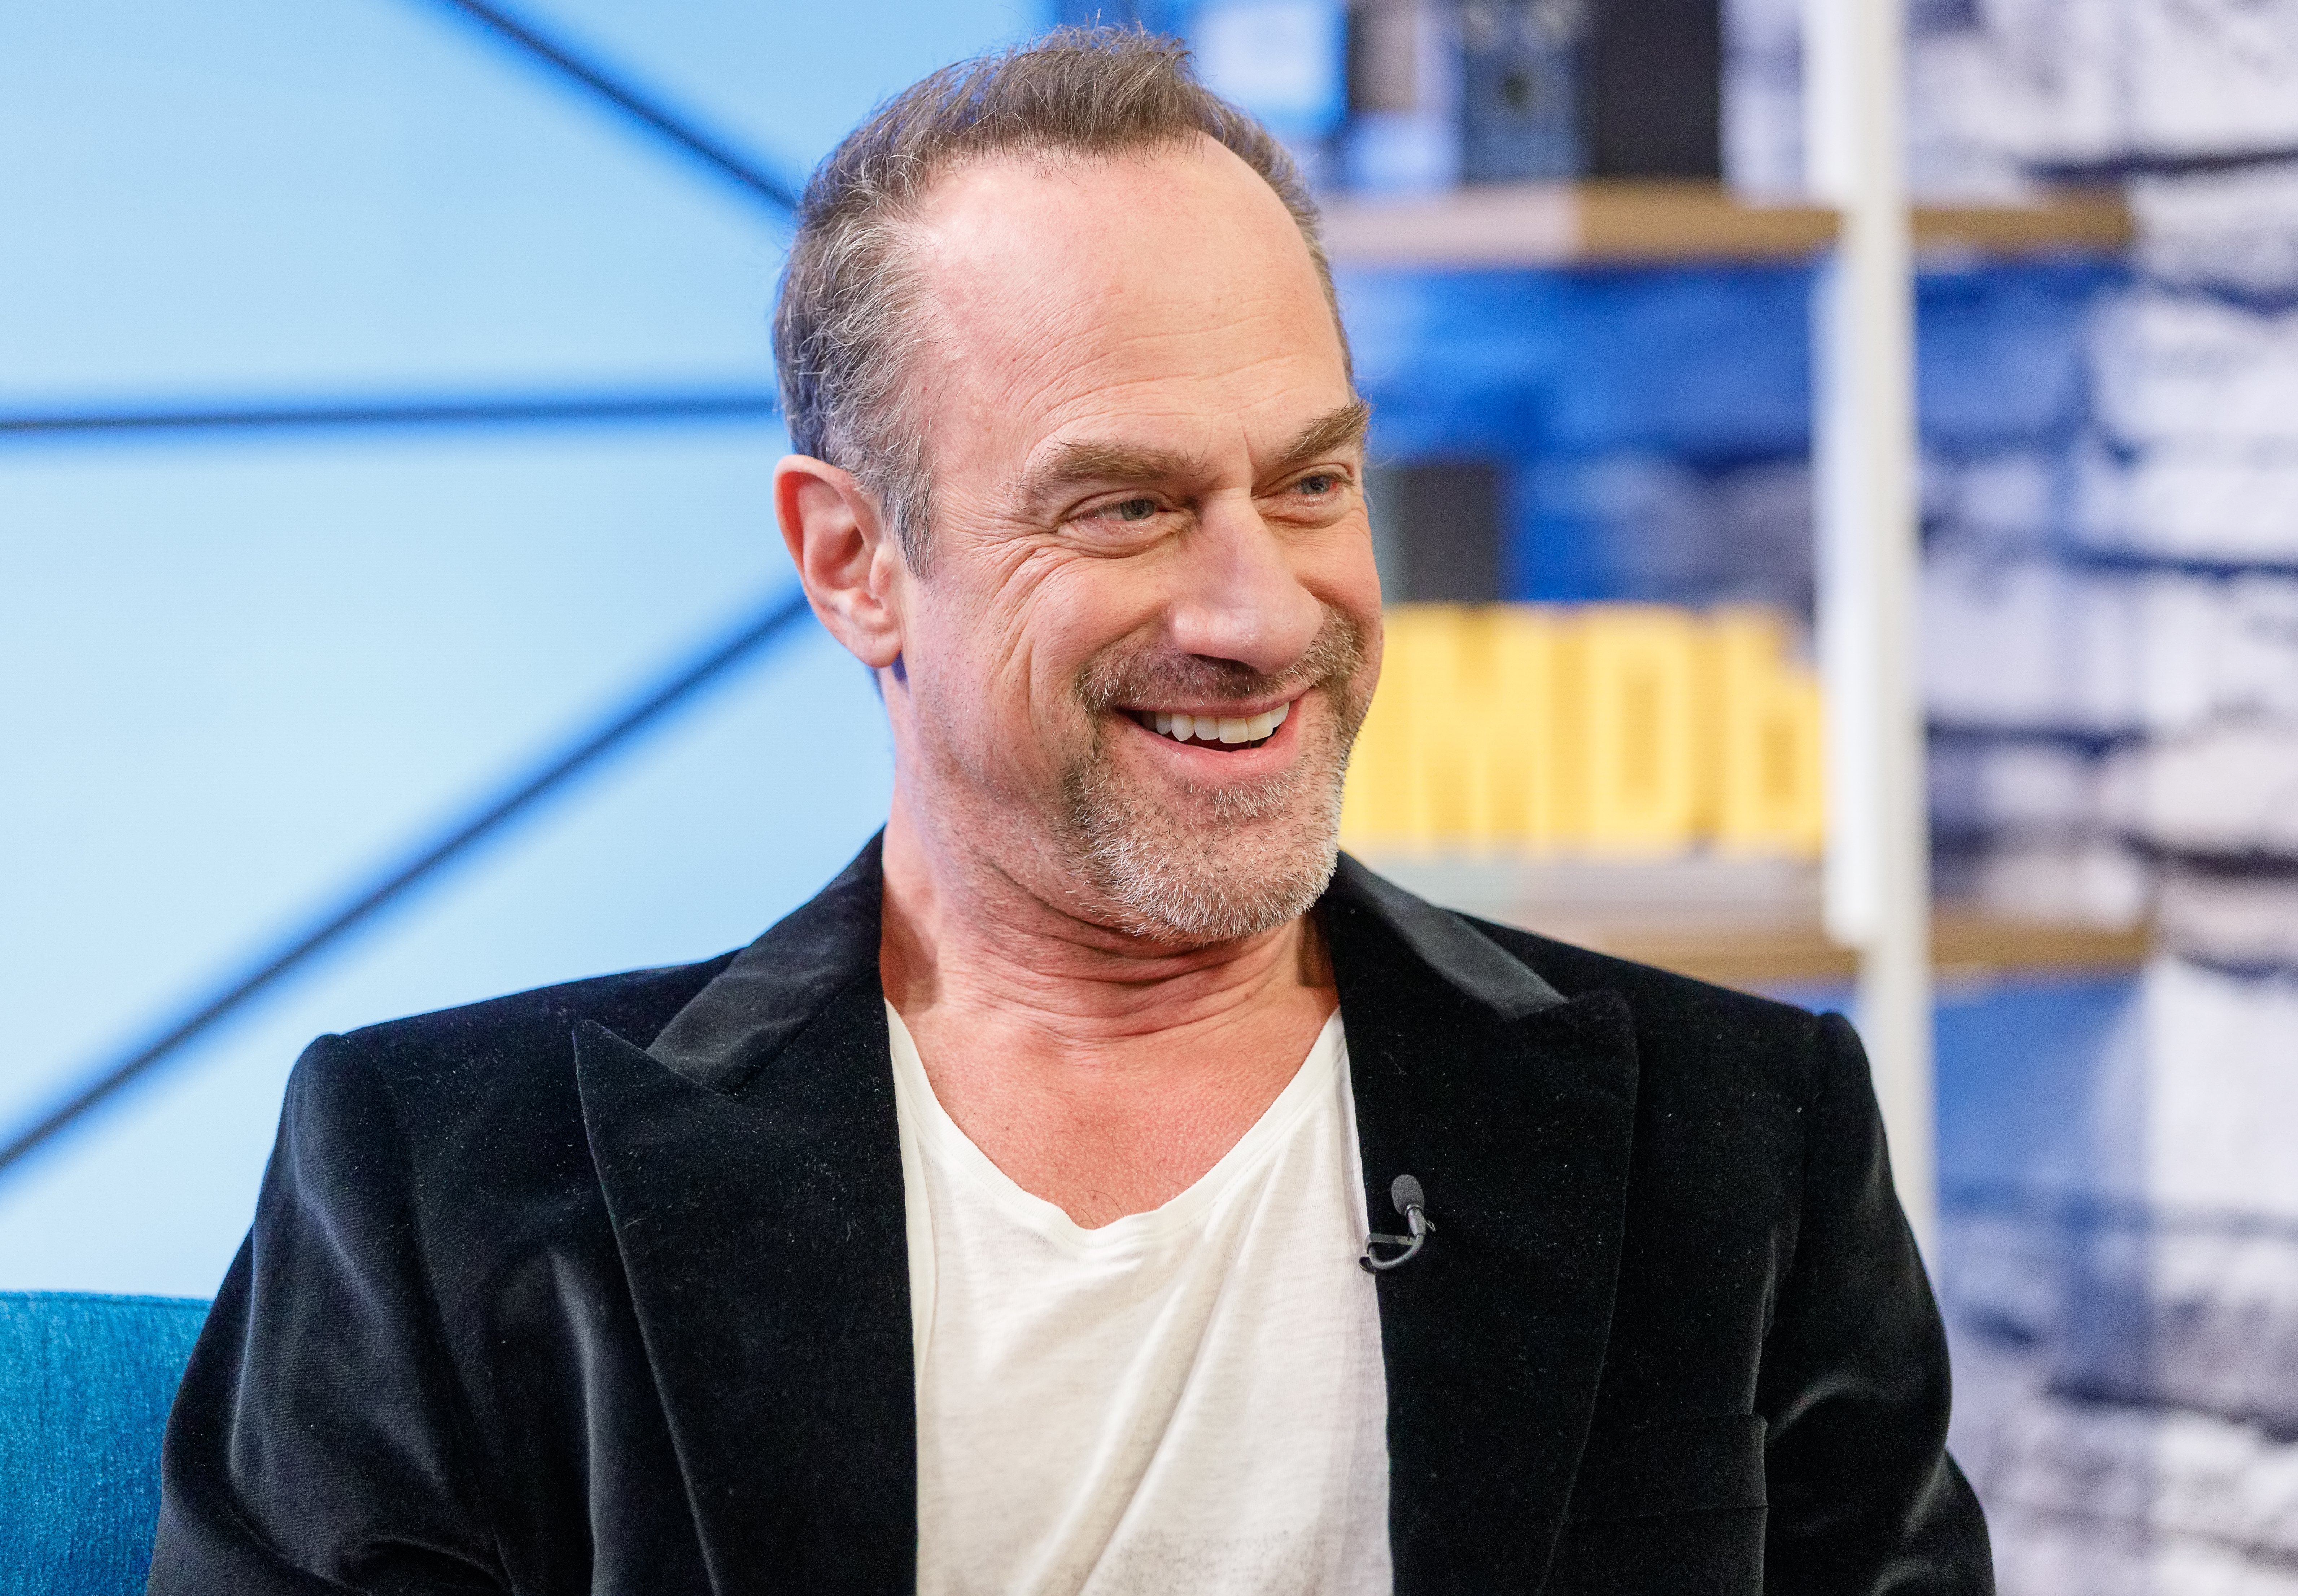 Christopher Meloni visits 'The IMDb Show' on March 26, 2019 in Studio City, California. | Source: Getty Images